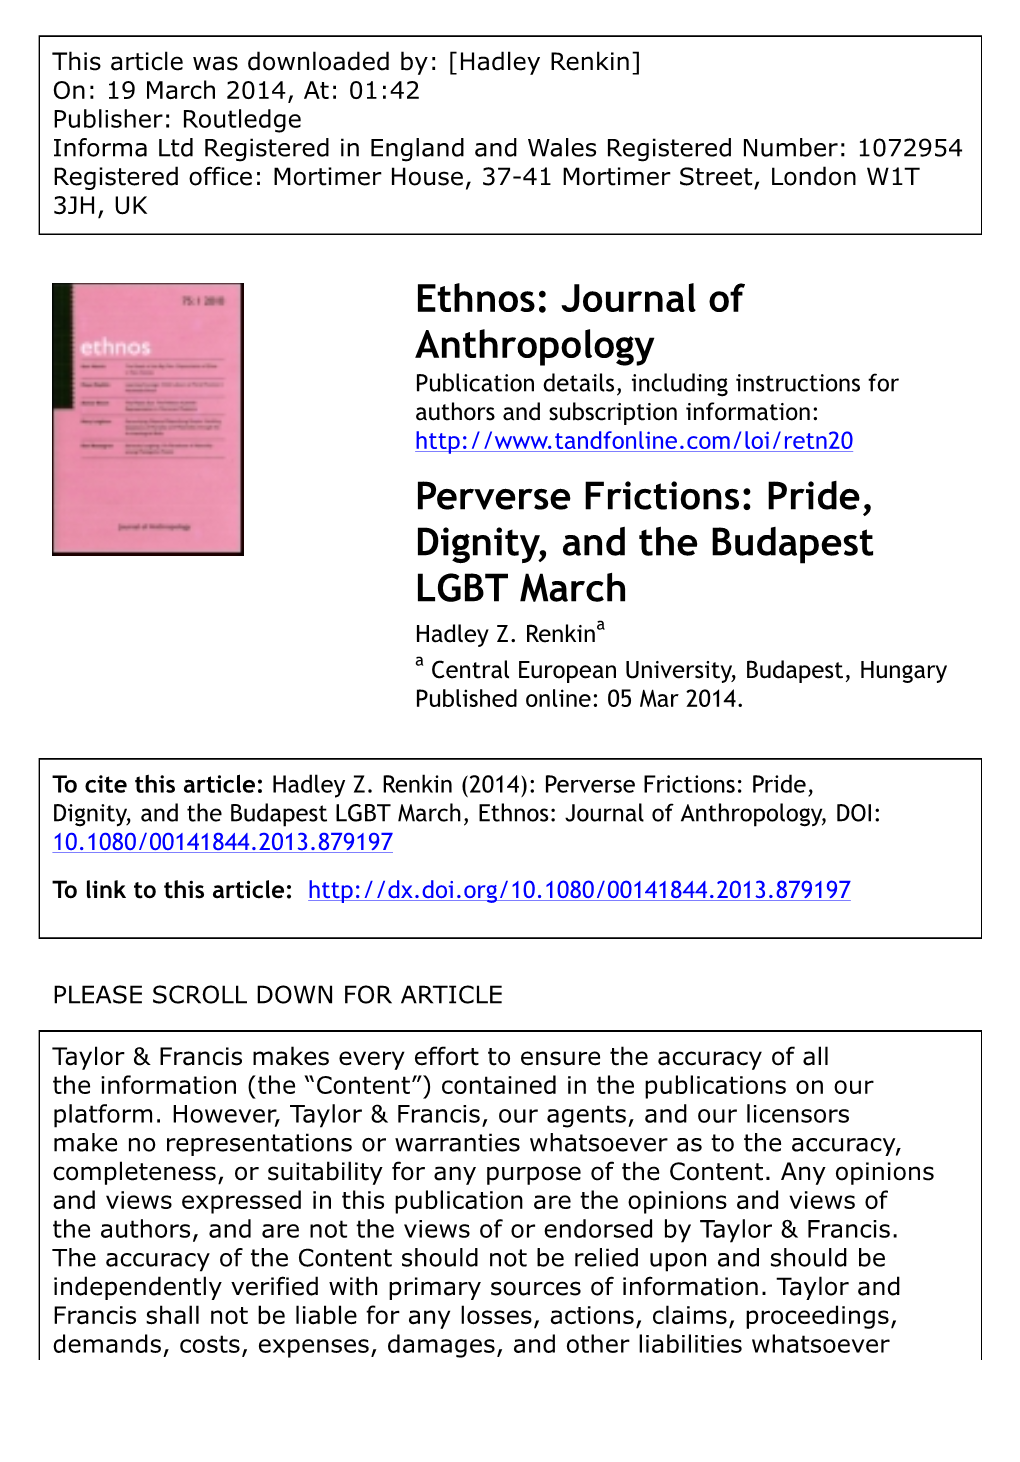 Perverse Frictions: Pride, Dignity, and the Budapest LGBT March Hadley Z